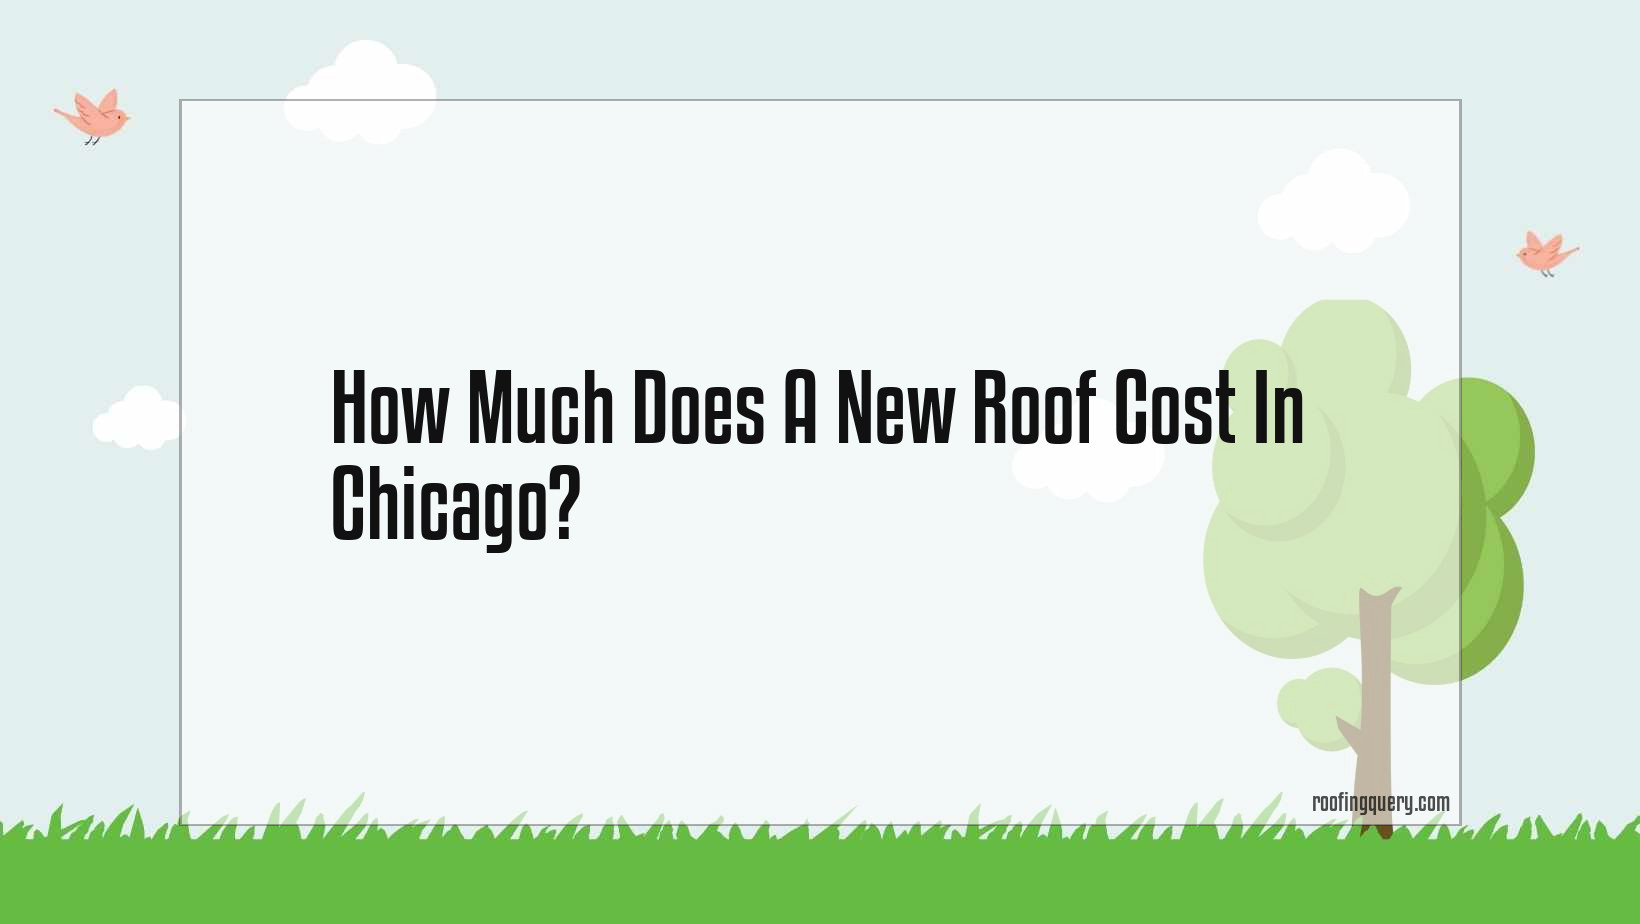 How Much Does A New Roof Cost In Chicago?